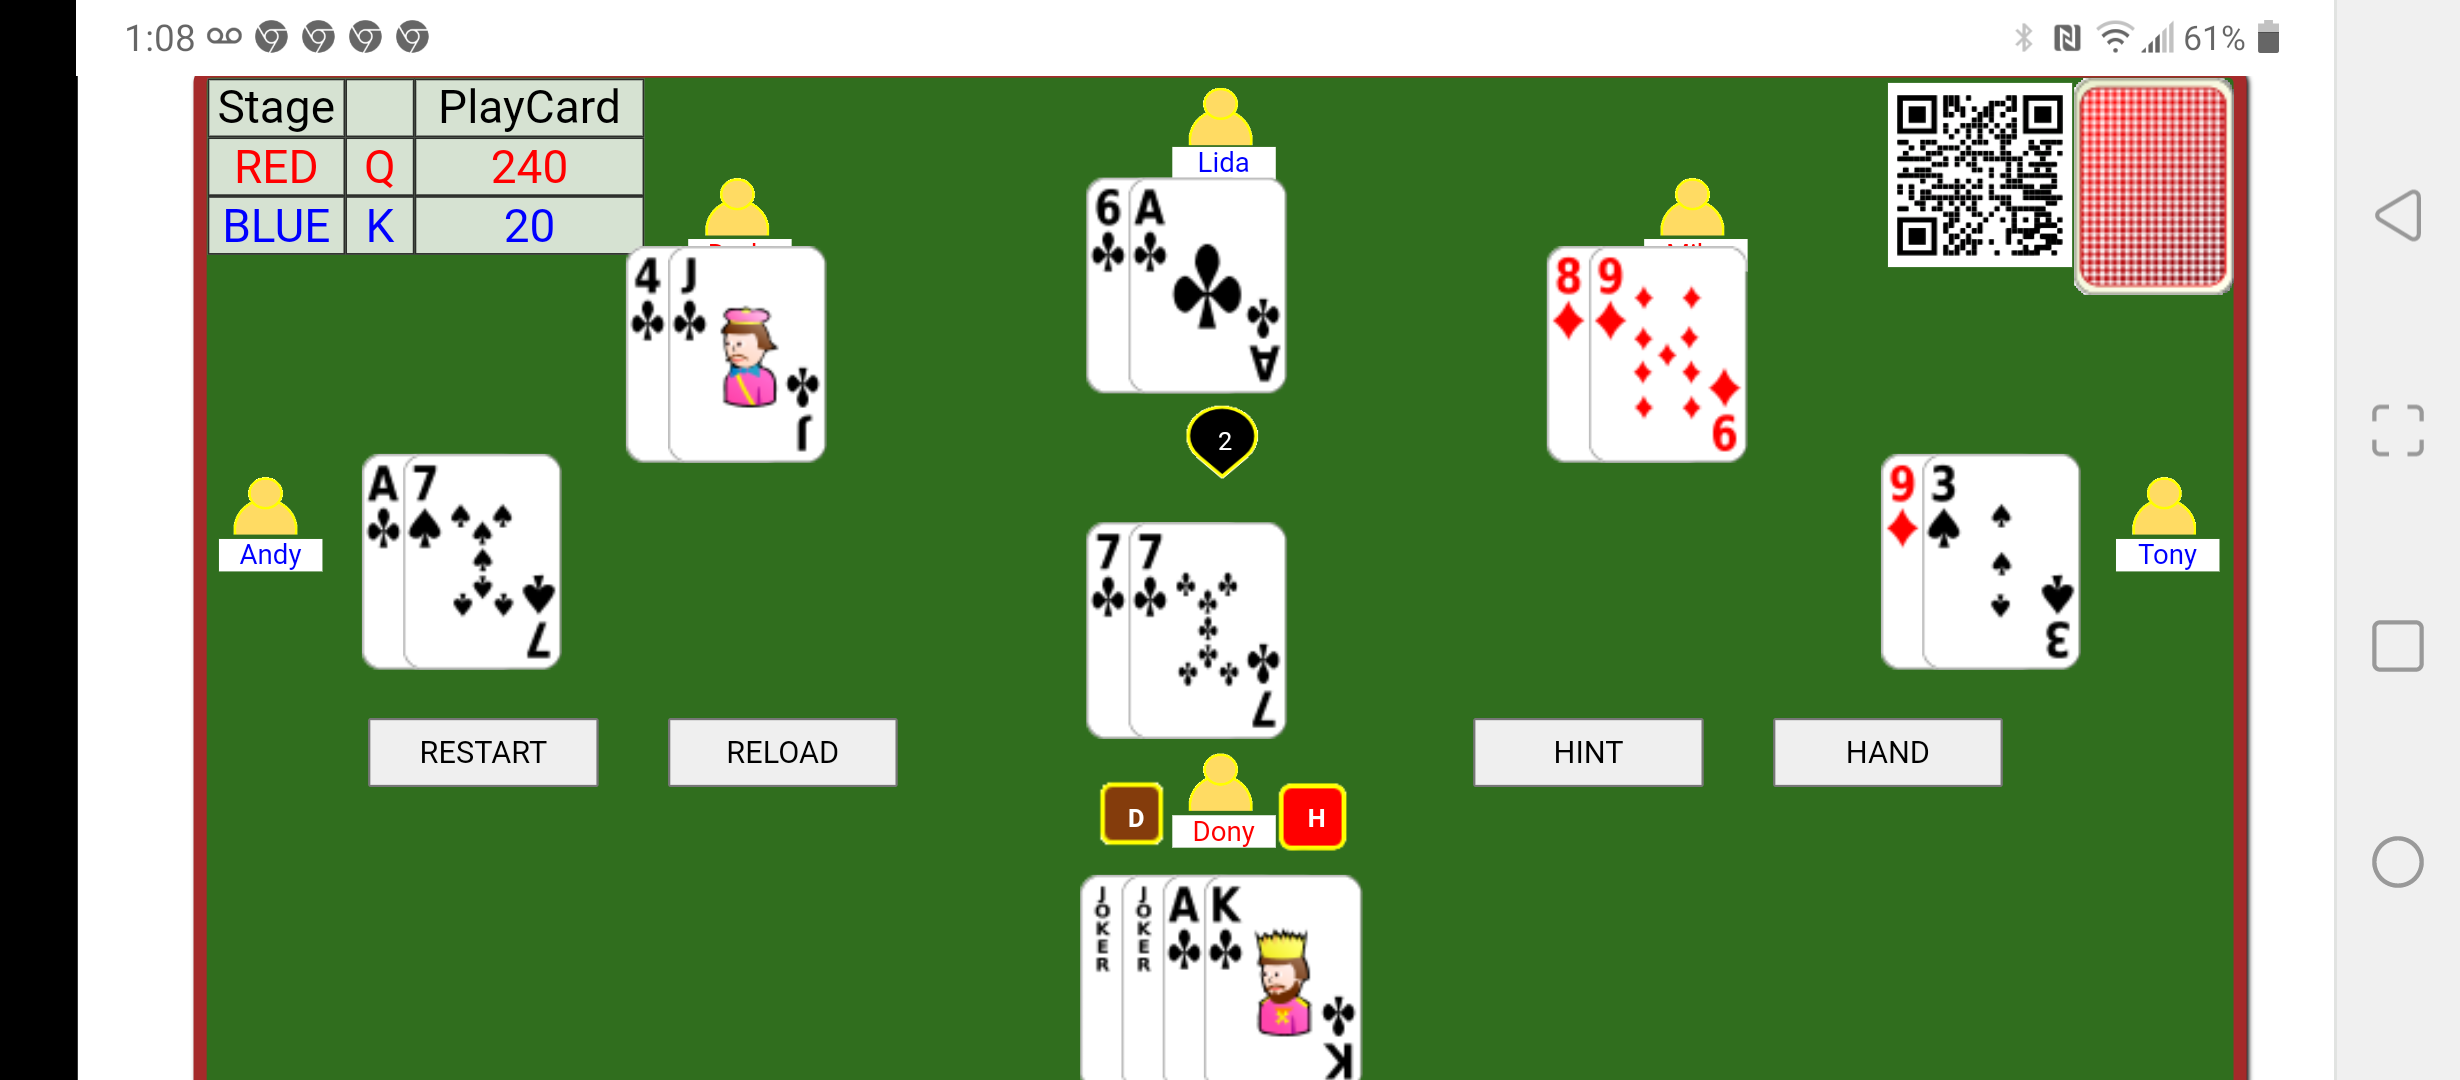 html5 tractor card game Screenshot_20220126-010817.png